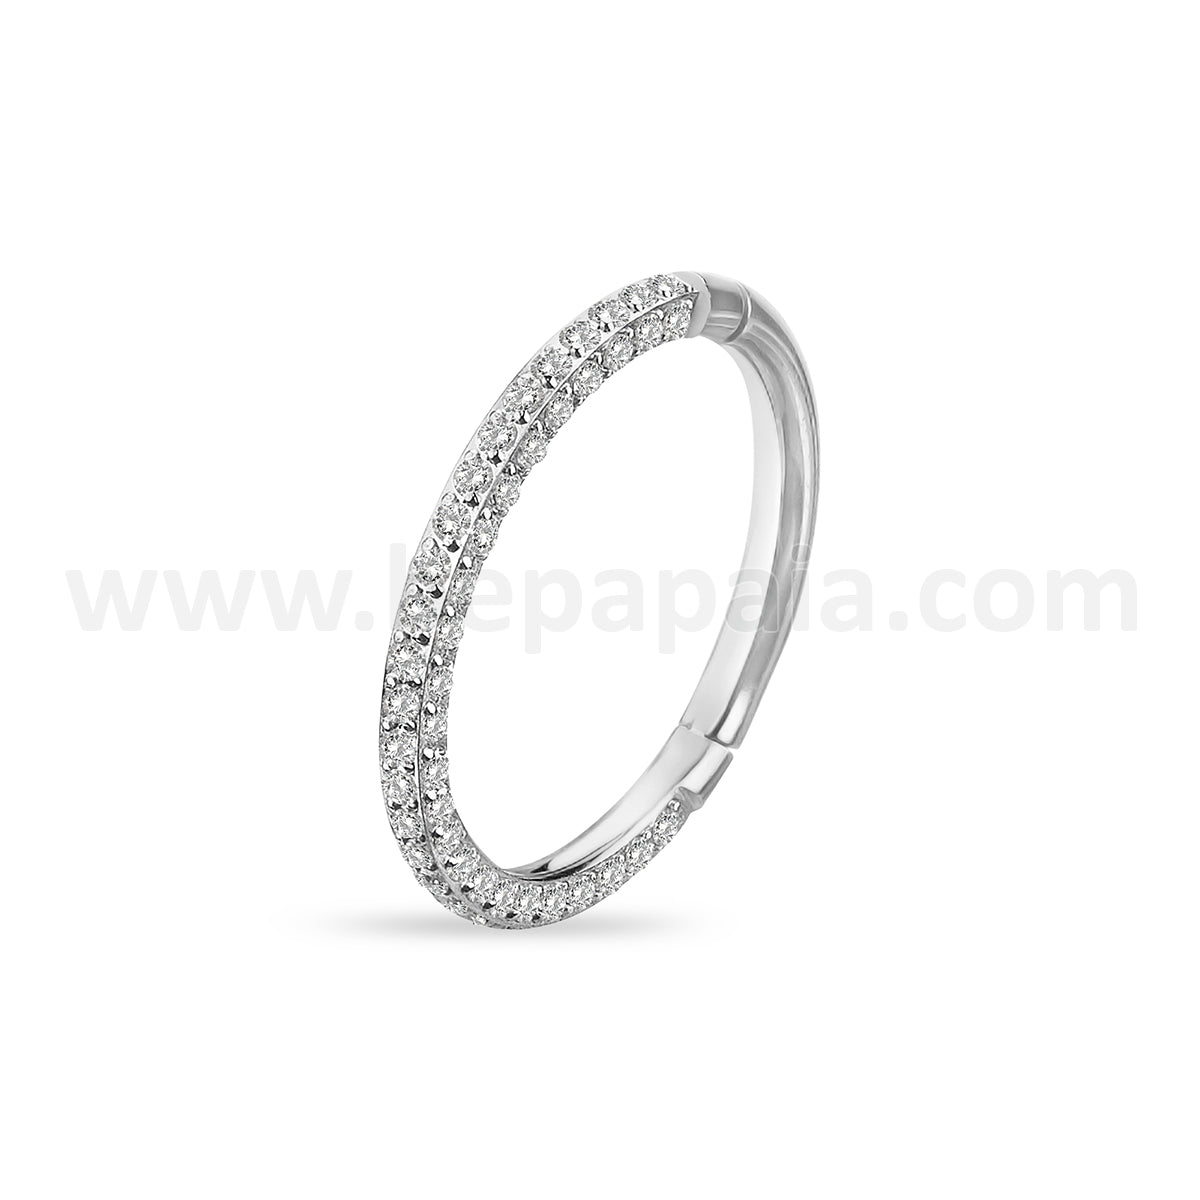 Surgical steel hinged segment ring with CZ paved on front and sides.